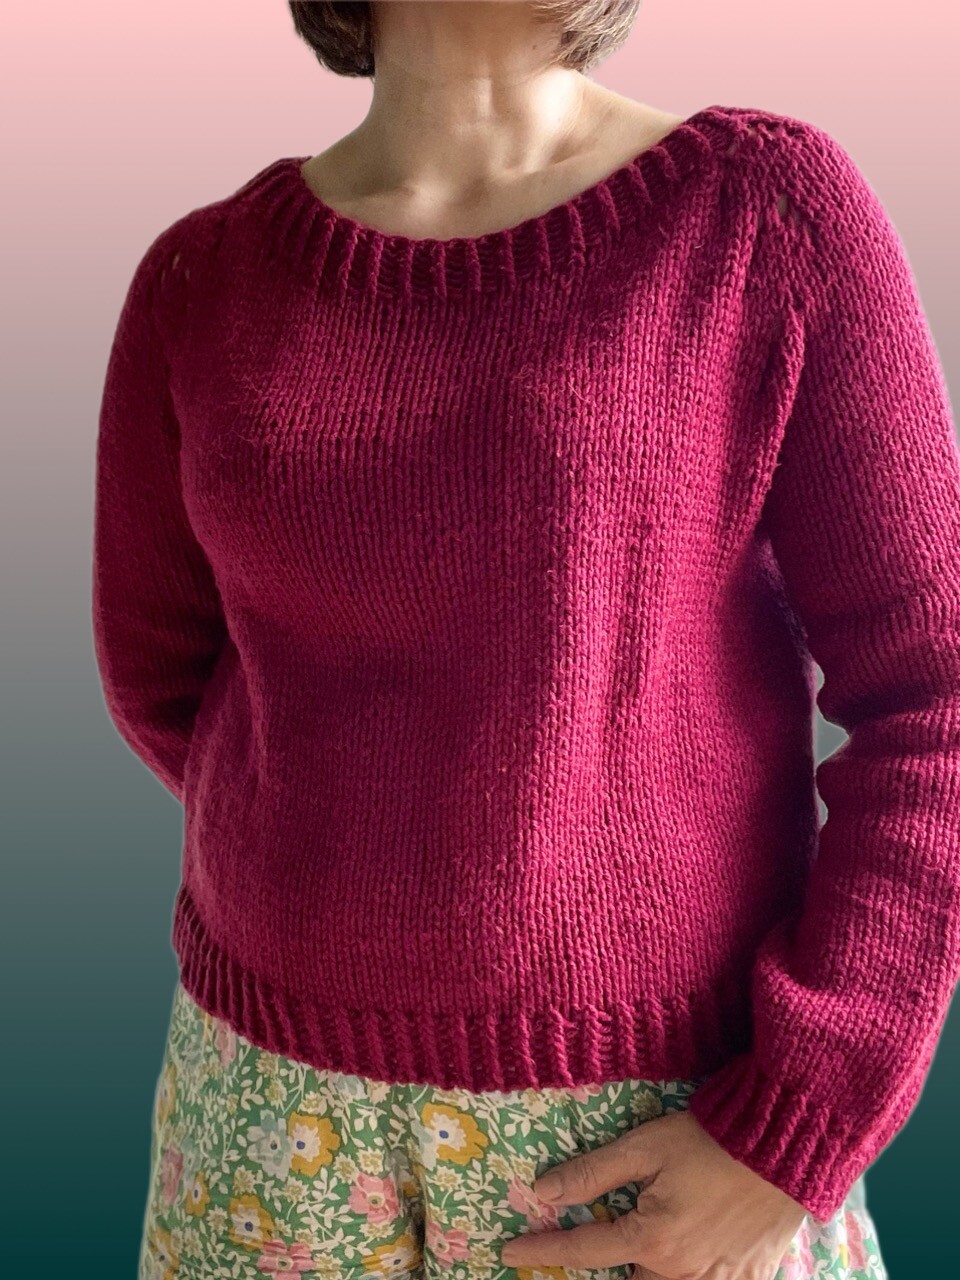 another look at my handknit sweater